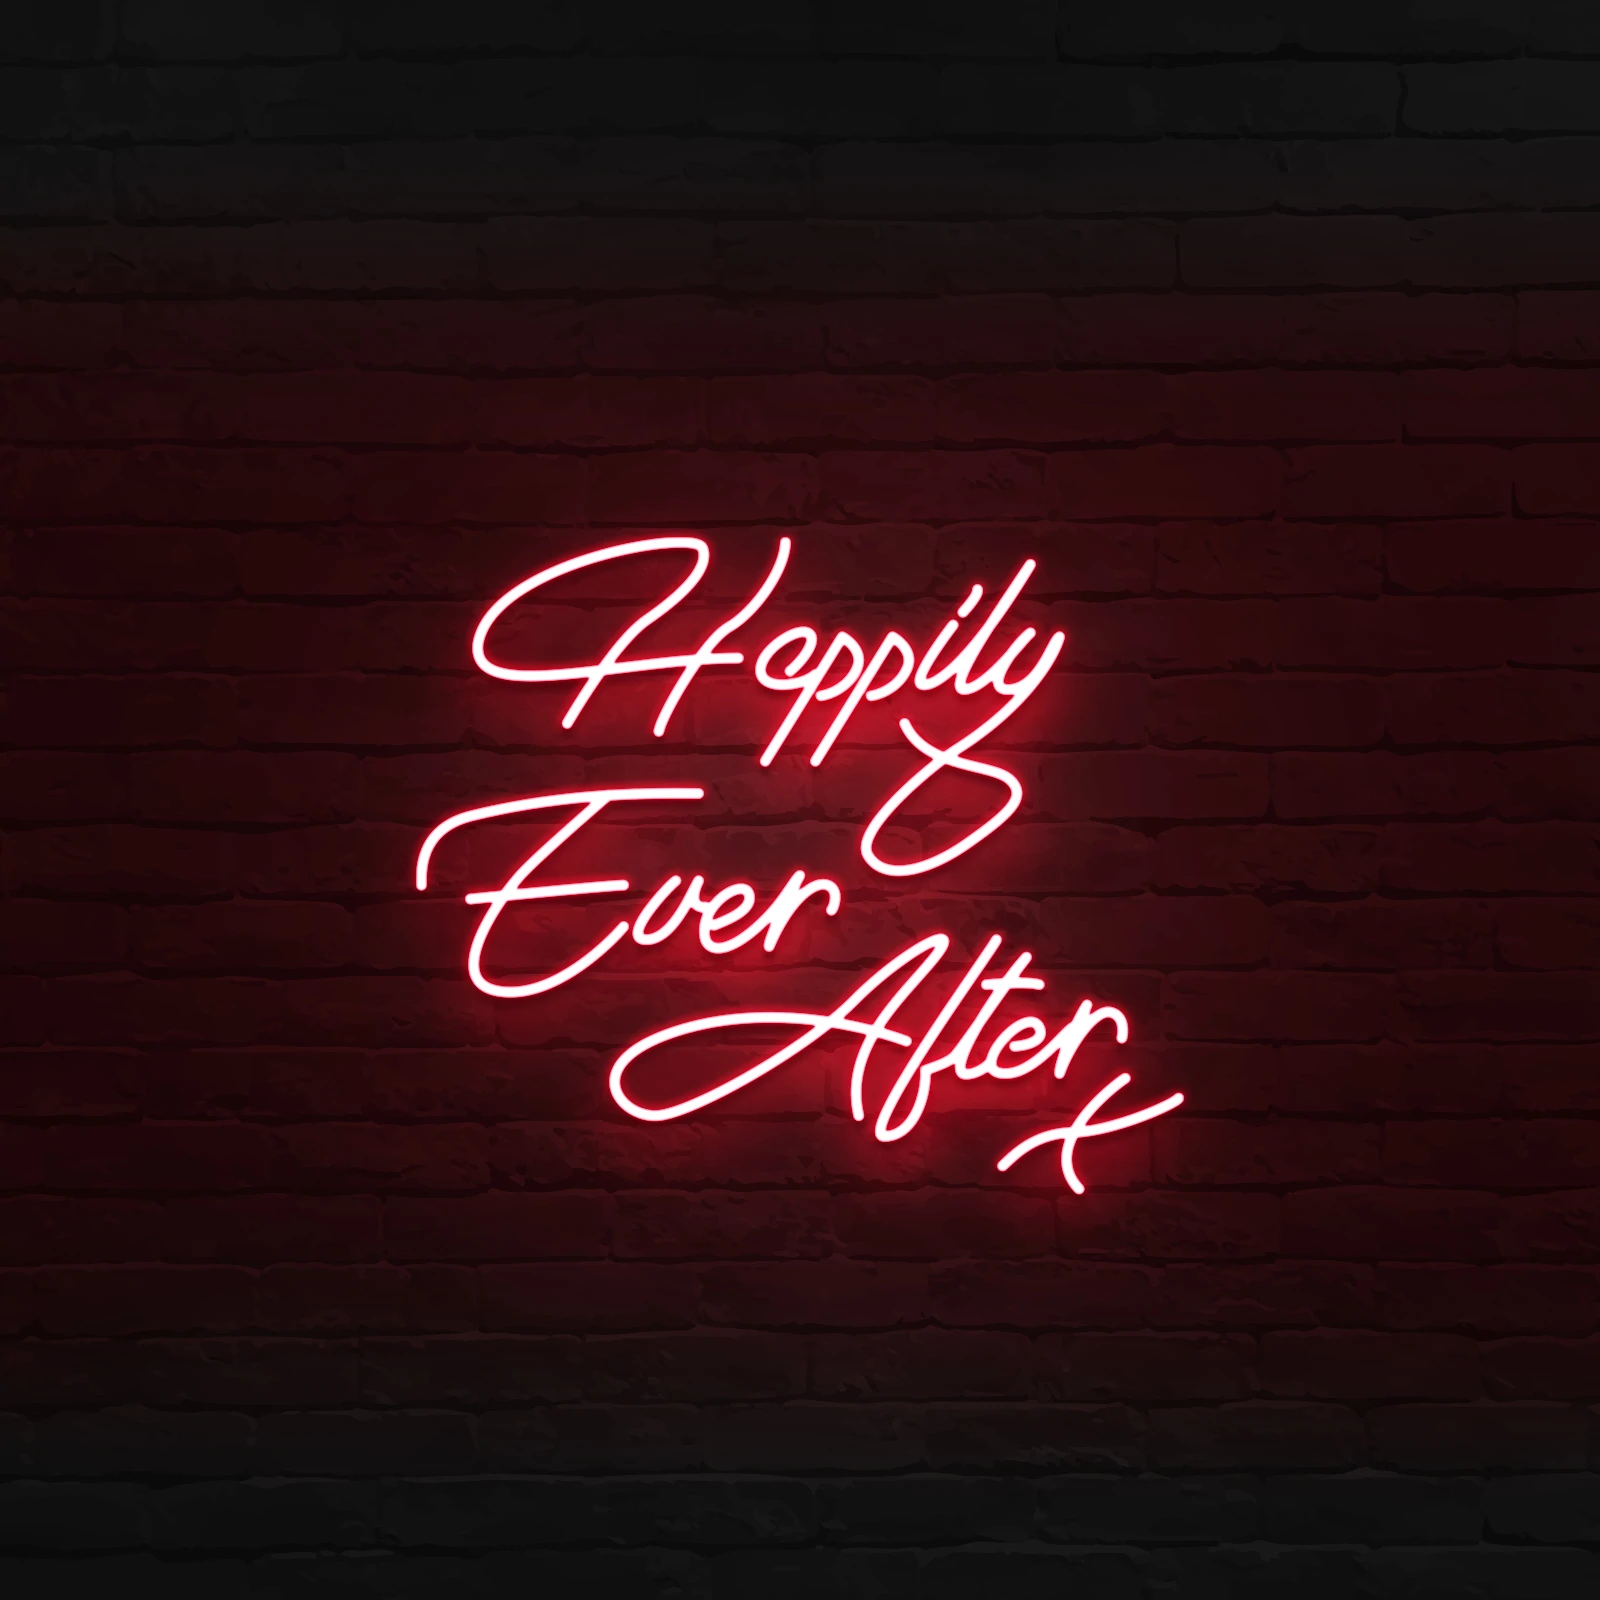 'HAPPILY EVER AFTER' NEON SIGN